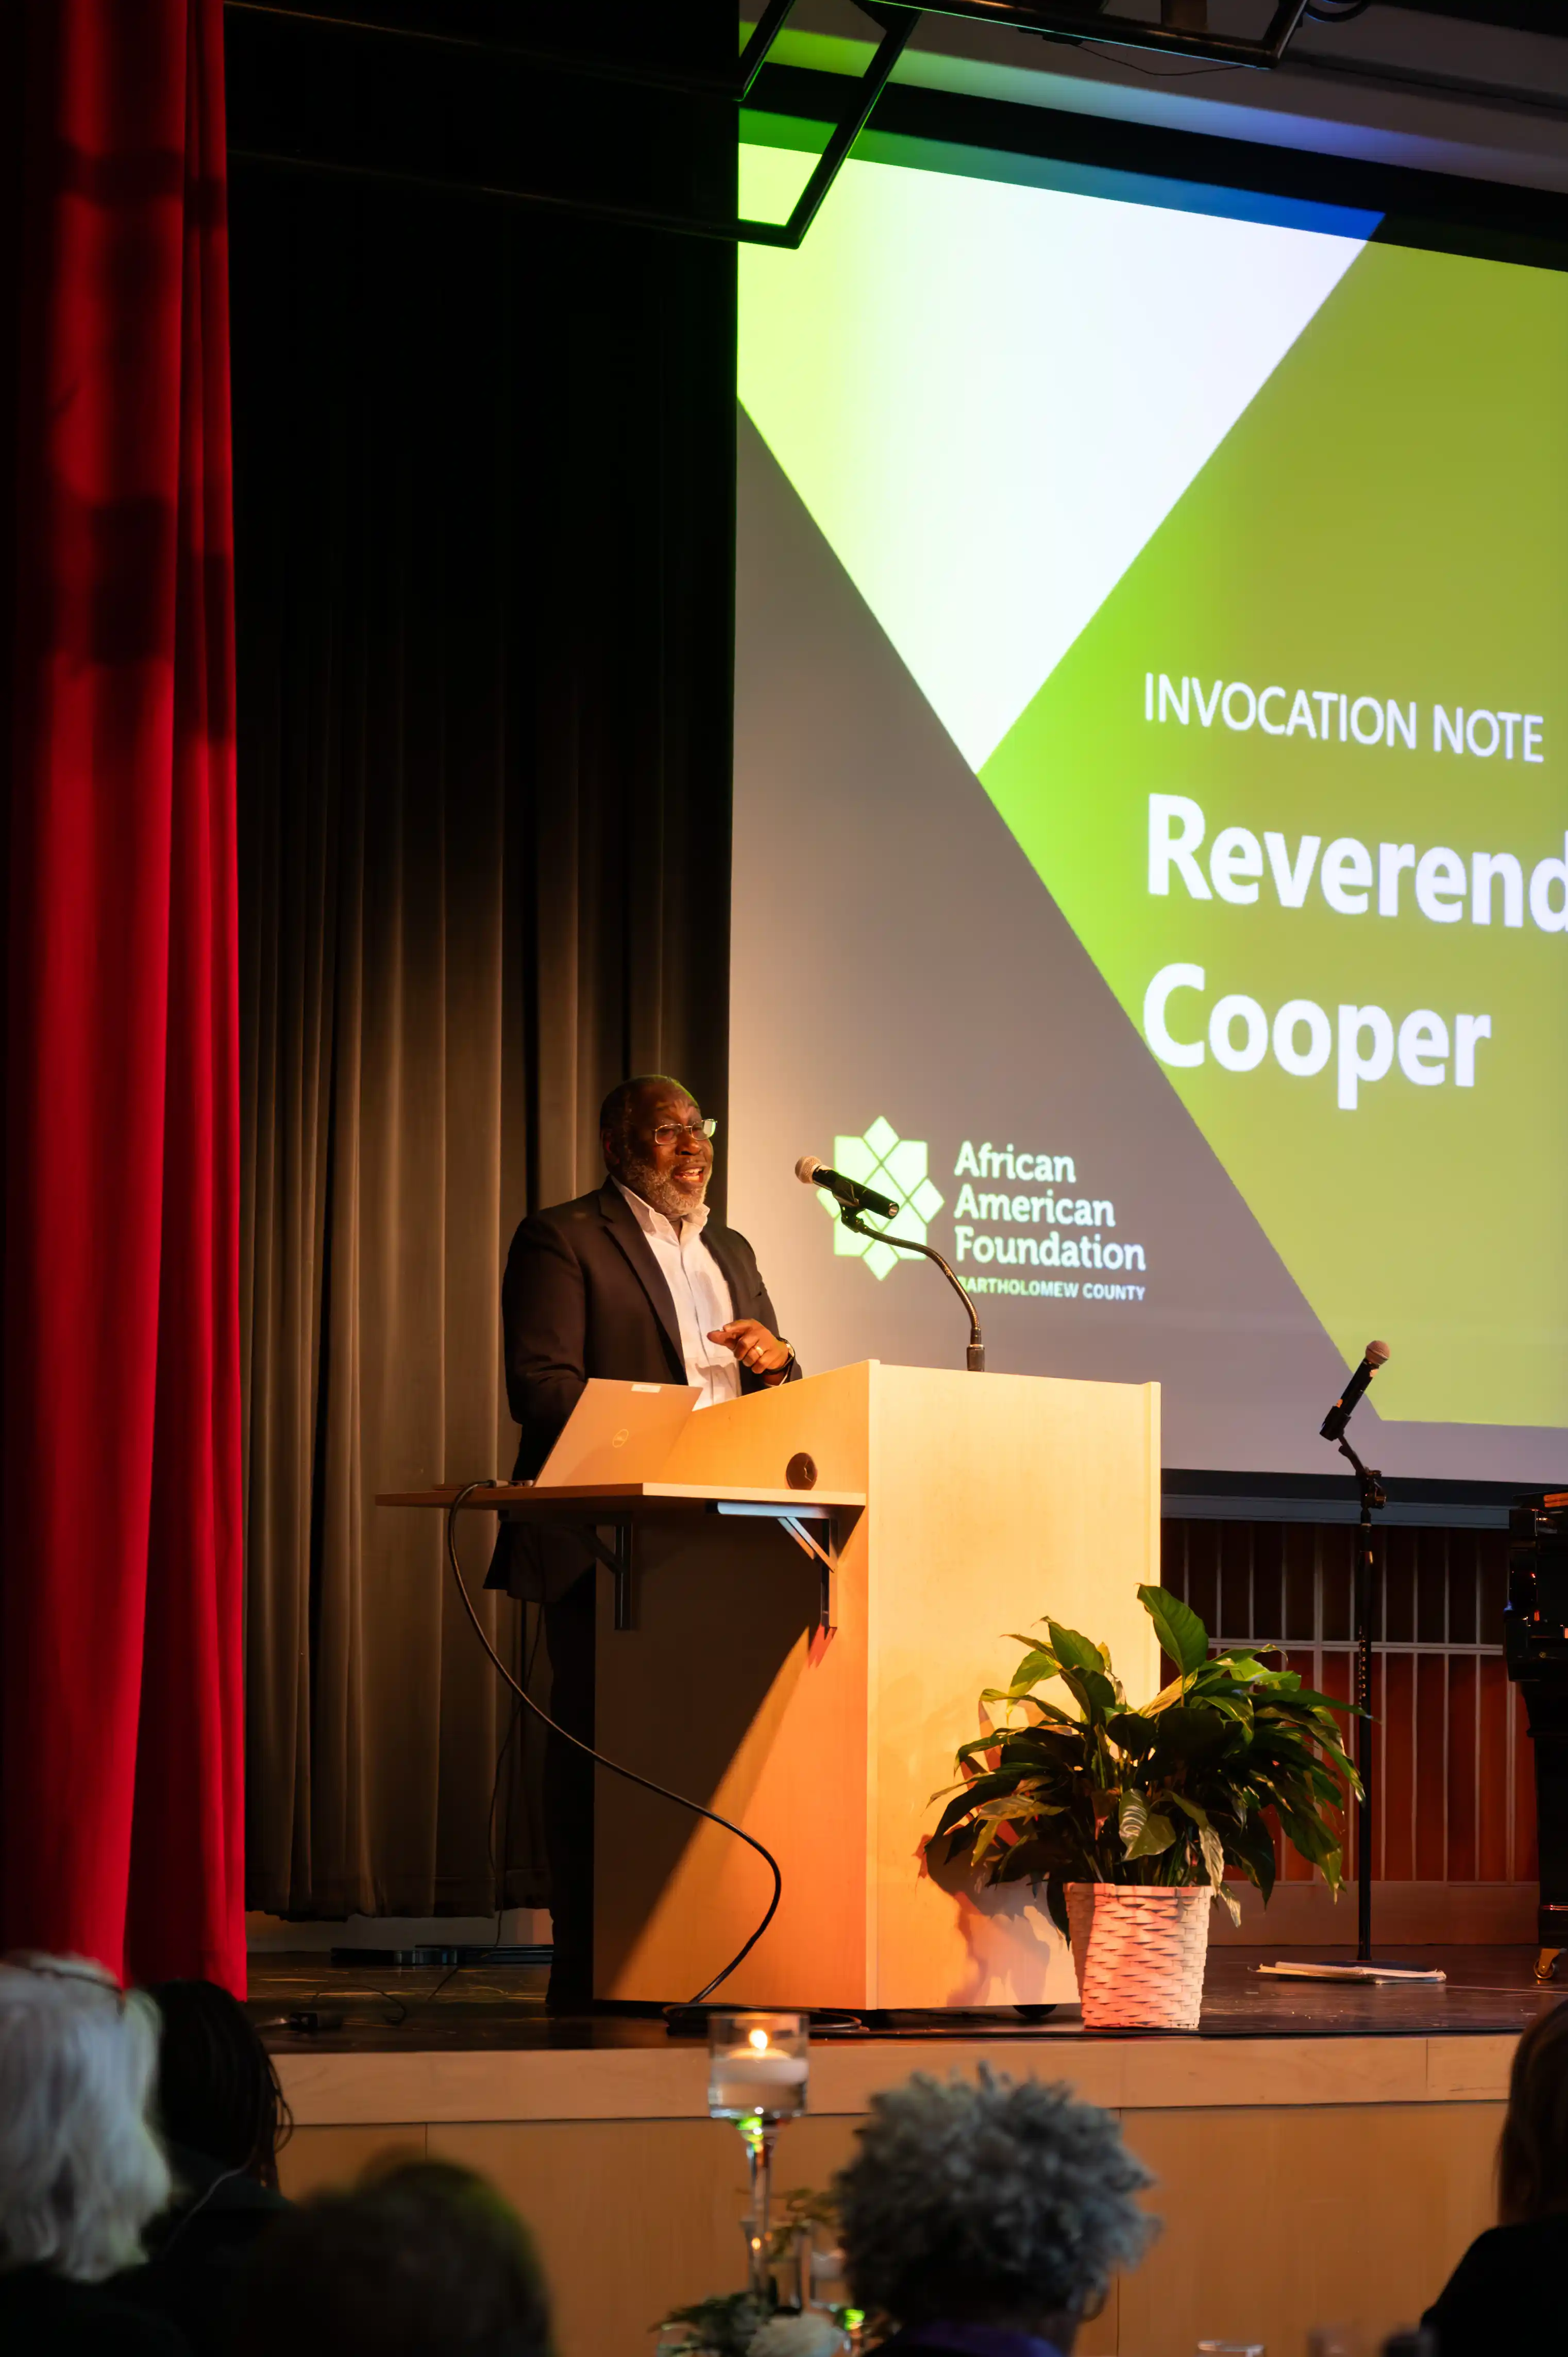 Speaker at podium presenting at a conference with a presentation screen in the background displaying the name Reverend Cooper.